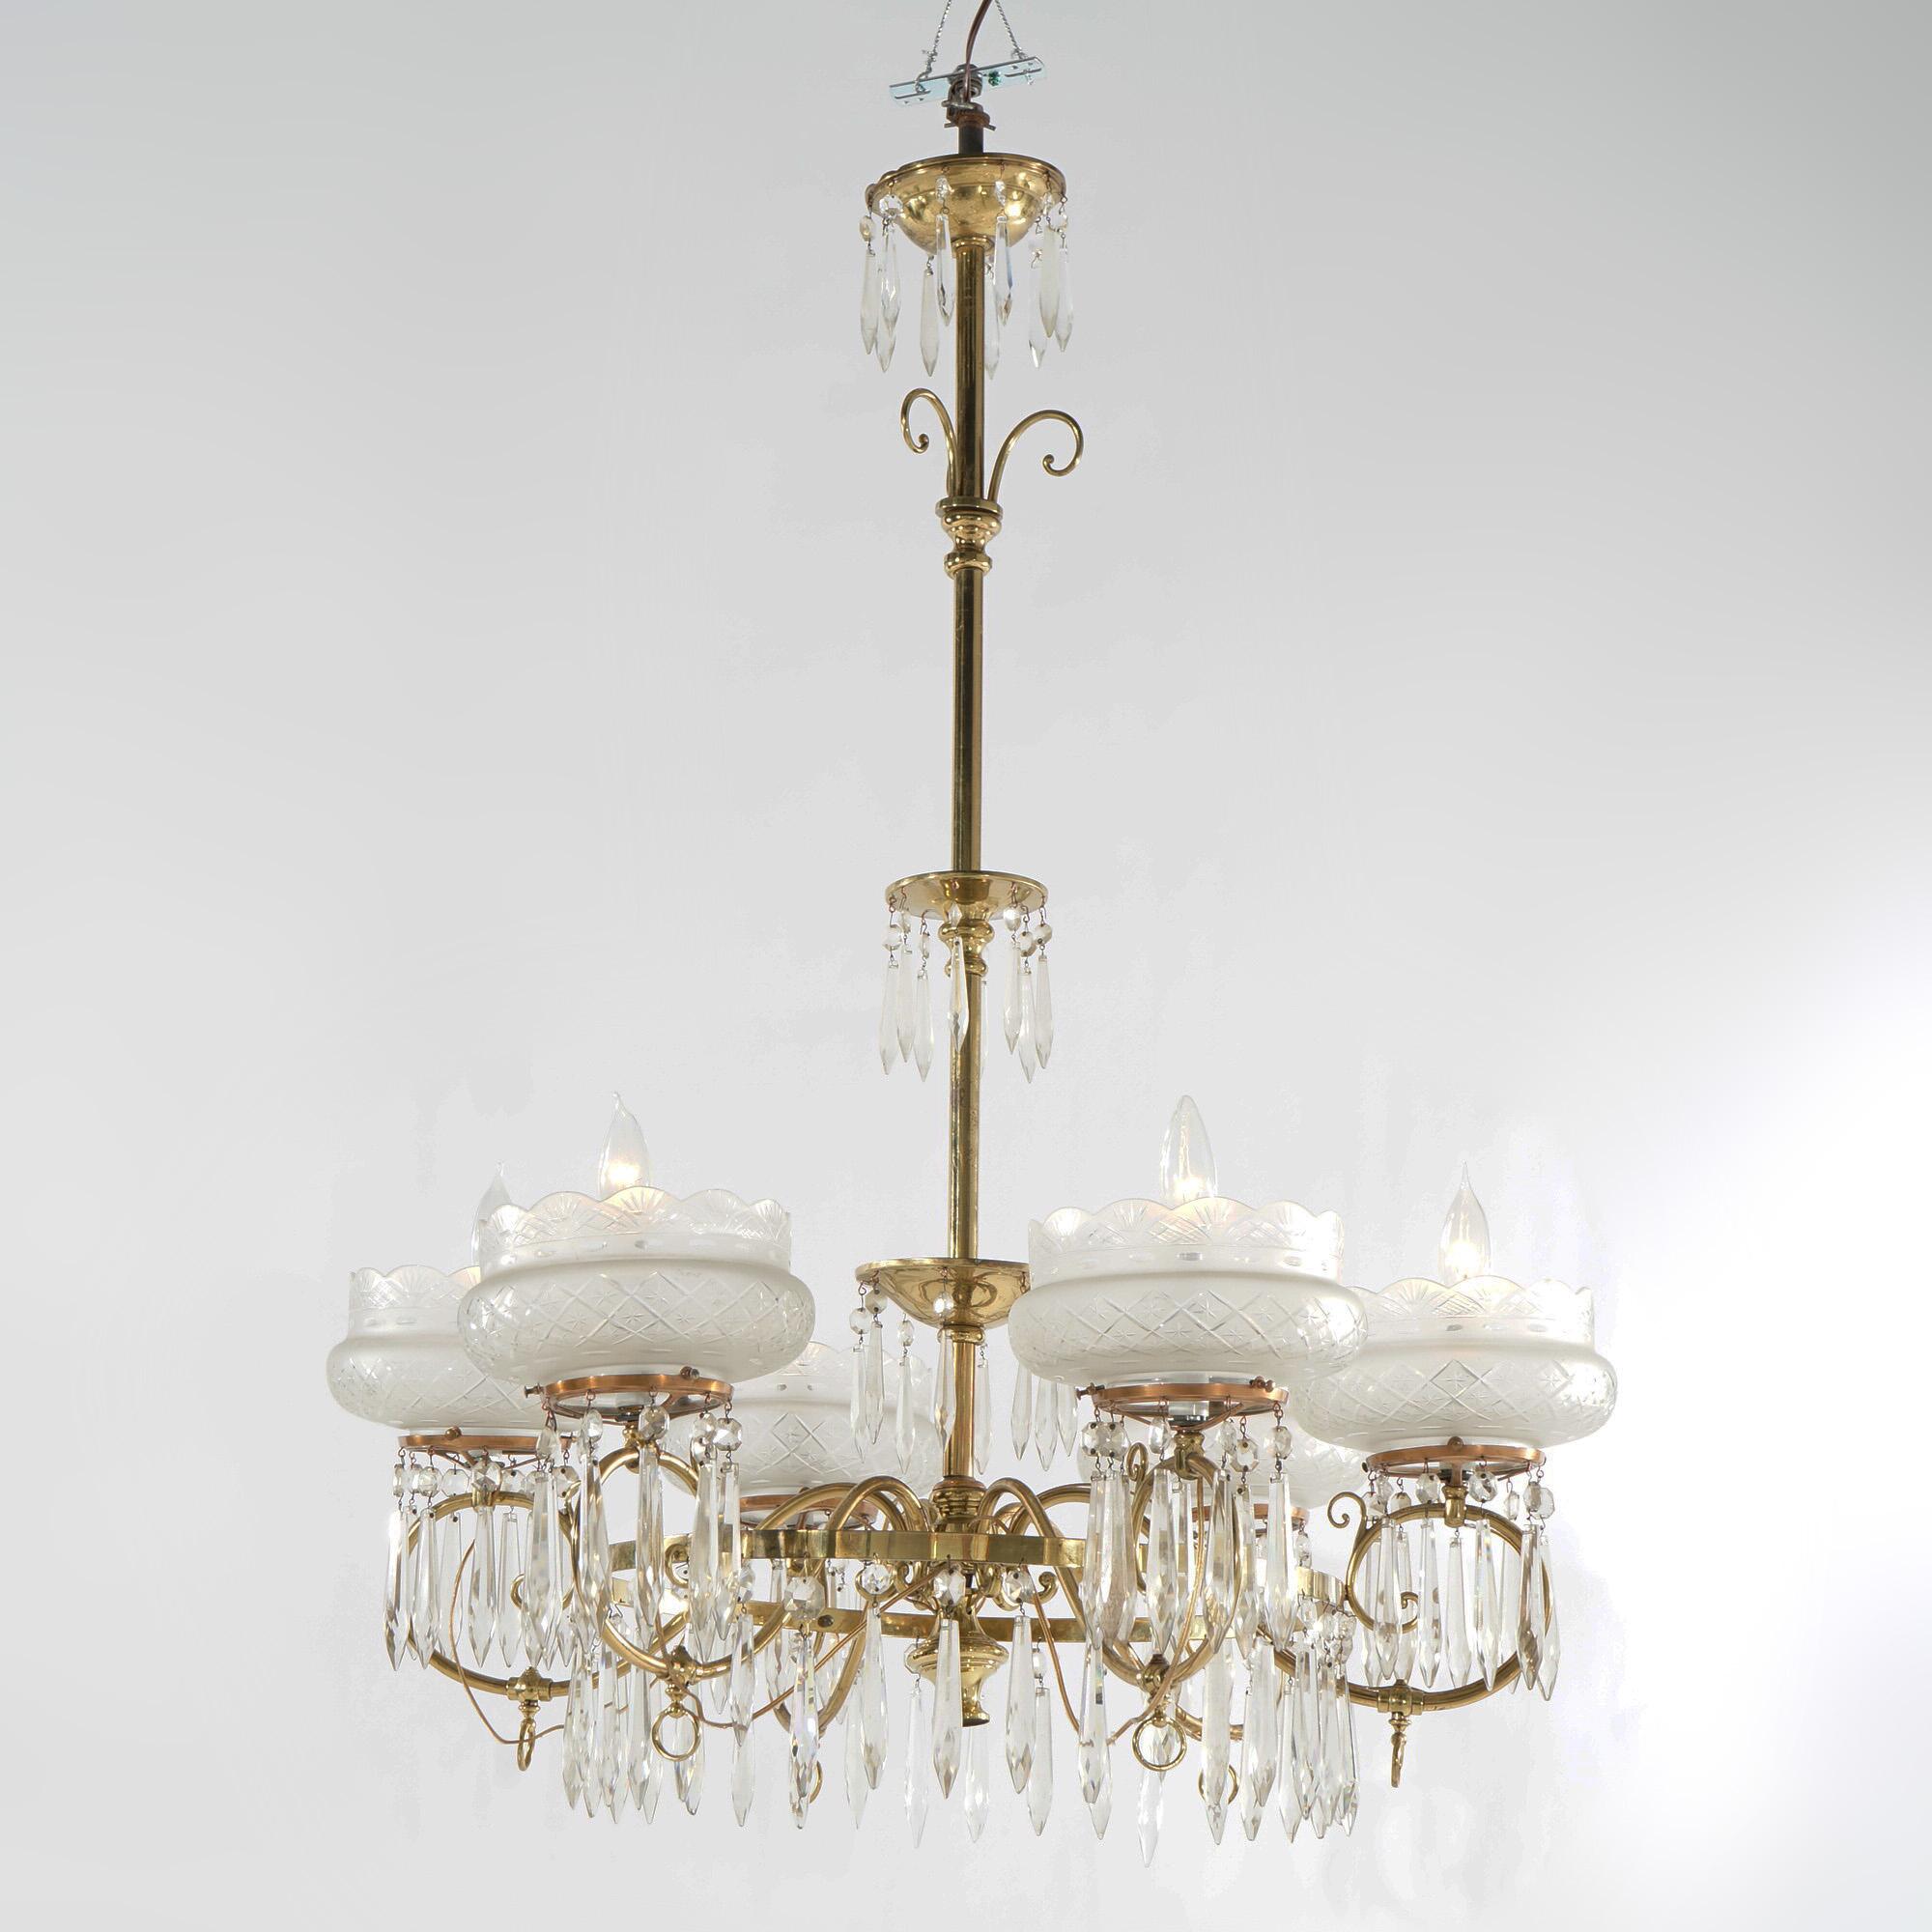 An oversized antique Aesthetic Movement chandelier offers brass frame with six scroll form arms terminating in candle lights with cut glass bowl form shades, hanging cut crystals throughout, gas converted to electric, circa 1870

Measures - 44.5